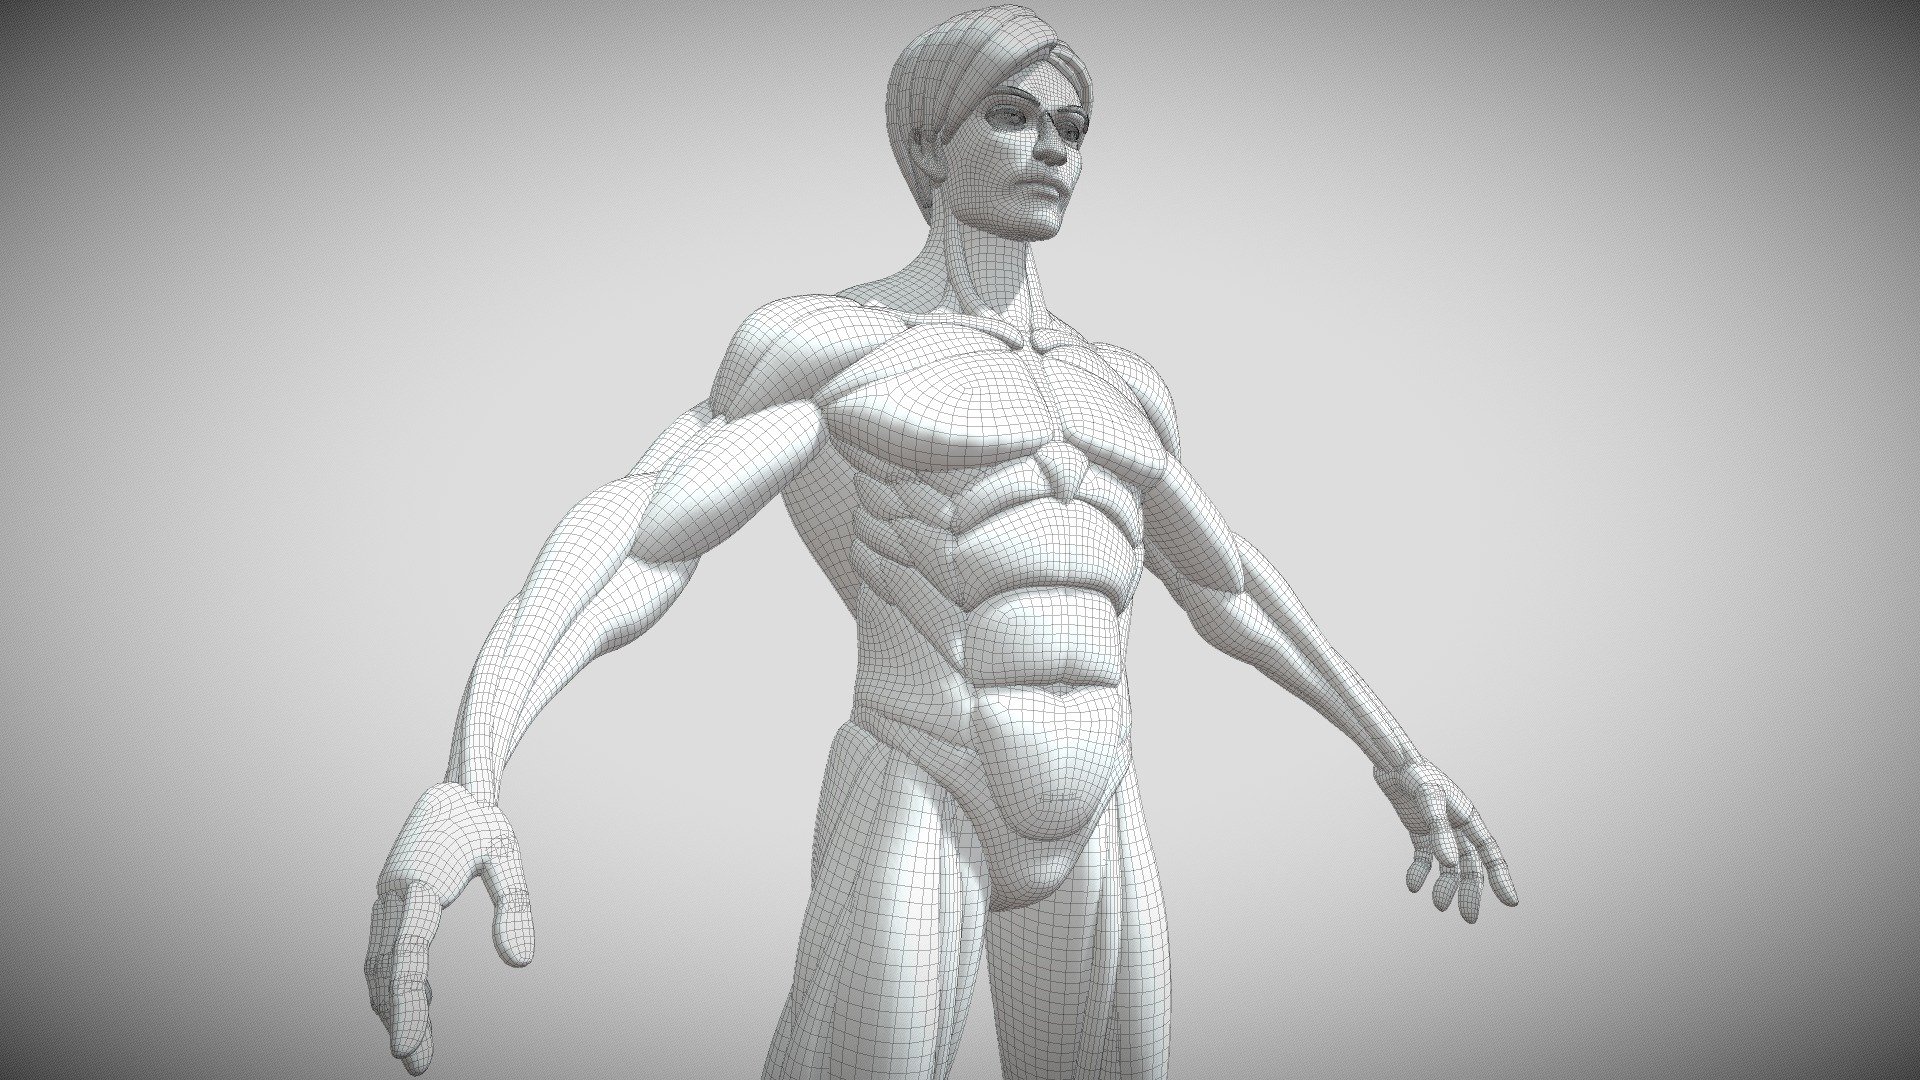 This item includes a low poly version of Cartoon Style Male Base Mesh No.1. For use in anything that you would need a base mesh of a male body for. Both models are poly-grouped and ready for sculpting.
Very fast rendering – Ready for sculpting.
Help increase your productivity! A good base mesh allows you to save time with foundation of any good sculpt, good proportions, clean topology and clean paint weight.




Features:

1 Clean topology lowpoly ZBrush mesh

Exported obj &amp; stl format file

Subdivision ready

Various body styles, standards, obesity, monsters&amp;superheroes

Not Include:

UV Unwrapped

Texture
 - Cartoon Style Male Base Mesh No.1 - 3D model by danielmclogan 3d model